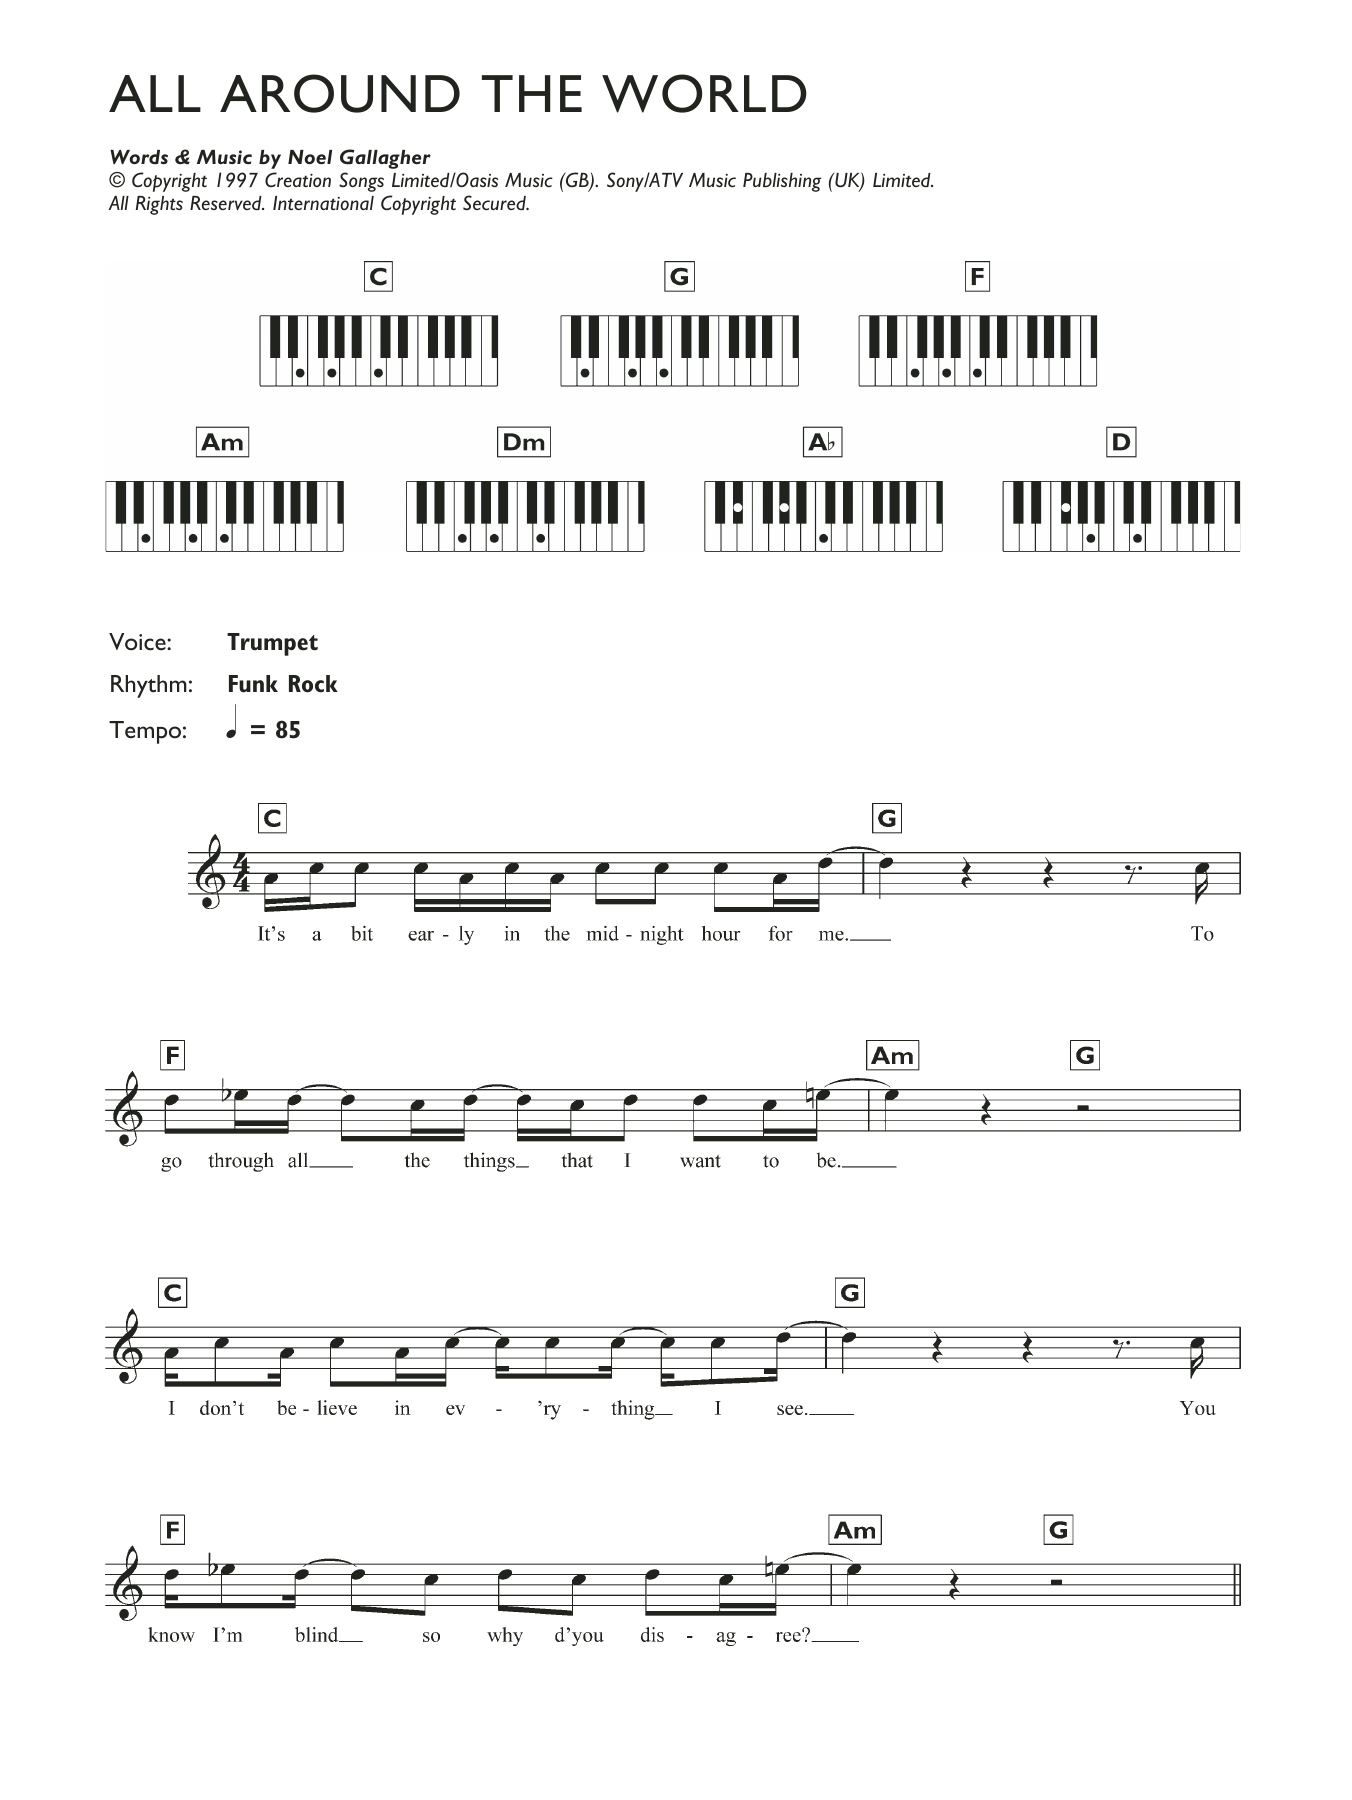 Download Oasis All Around The World Sheet Music